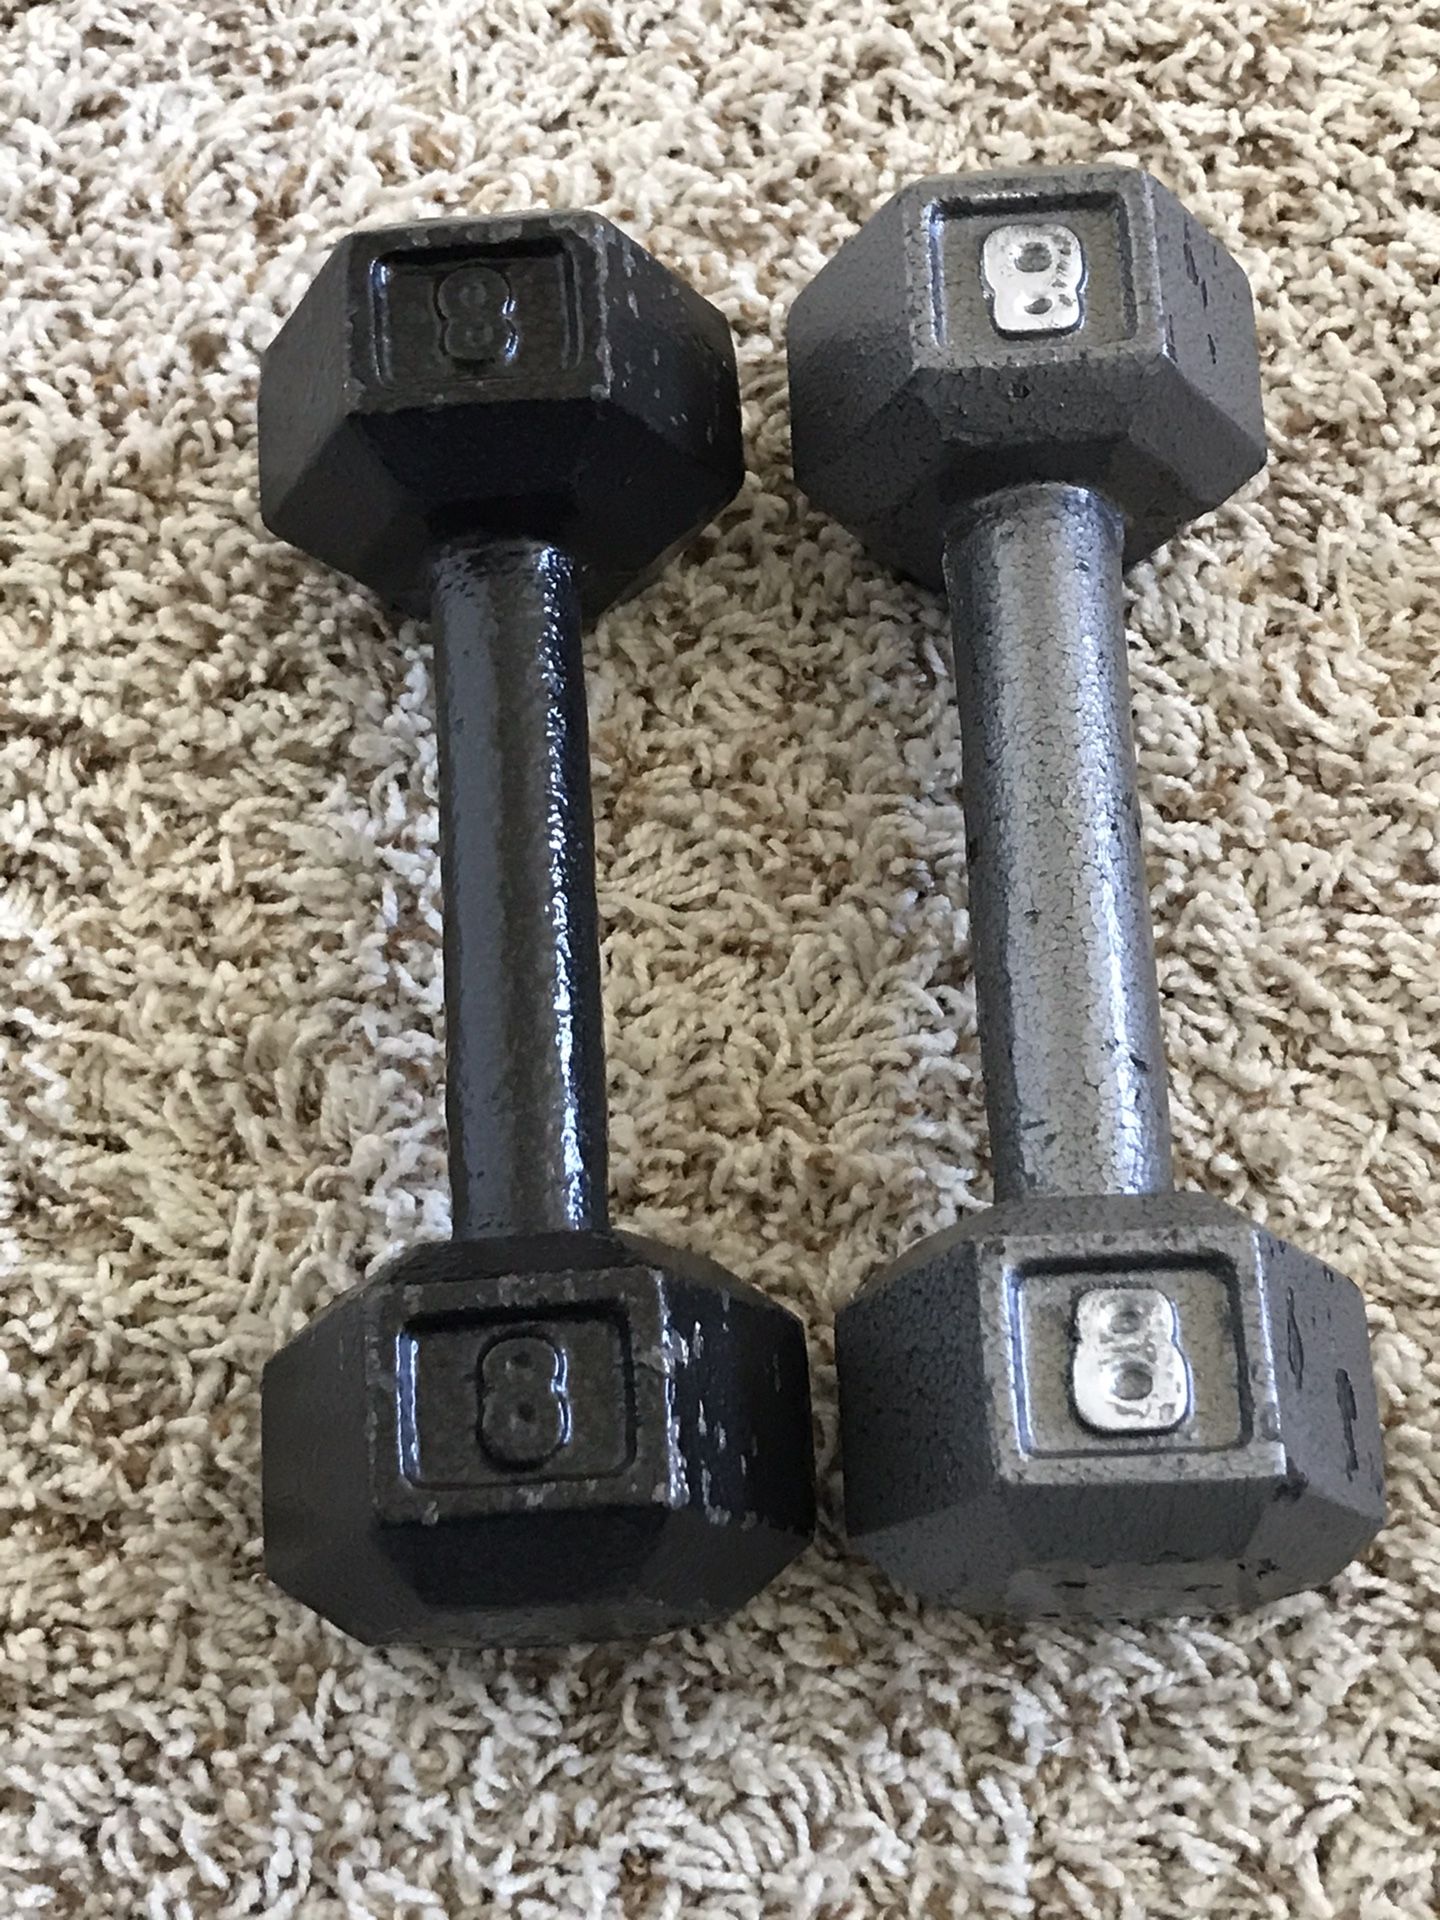 Two 8 pound dumbbells